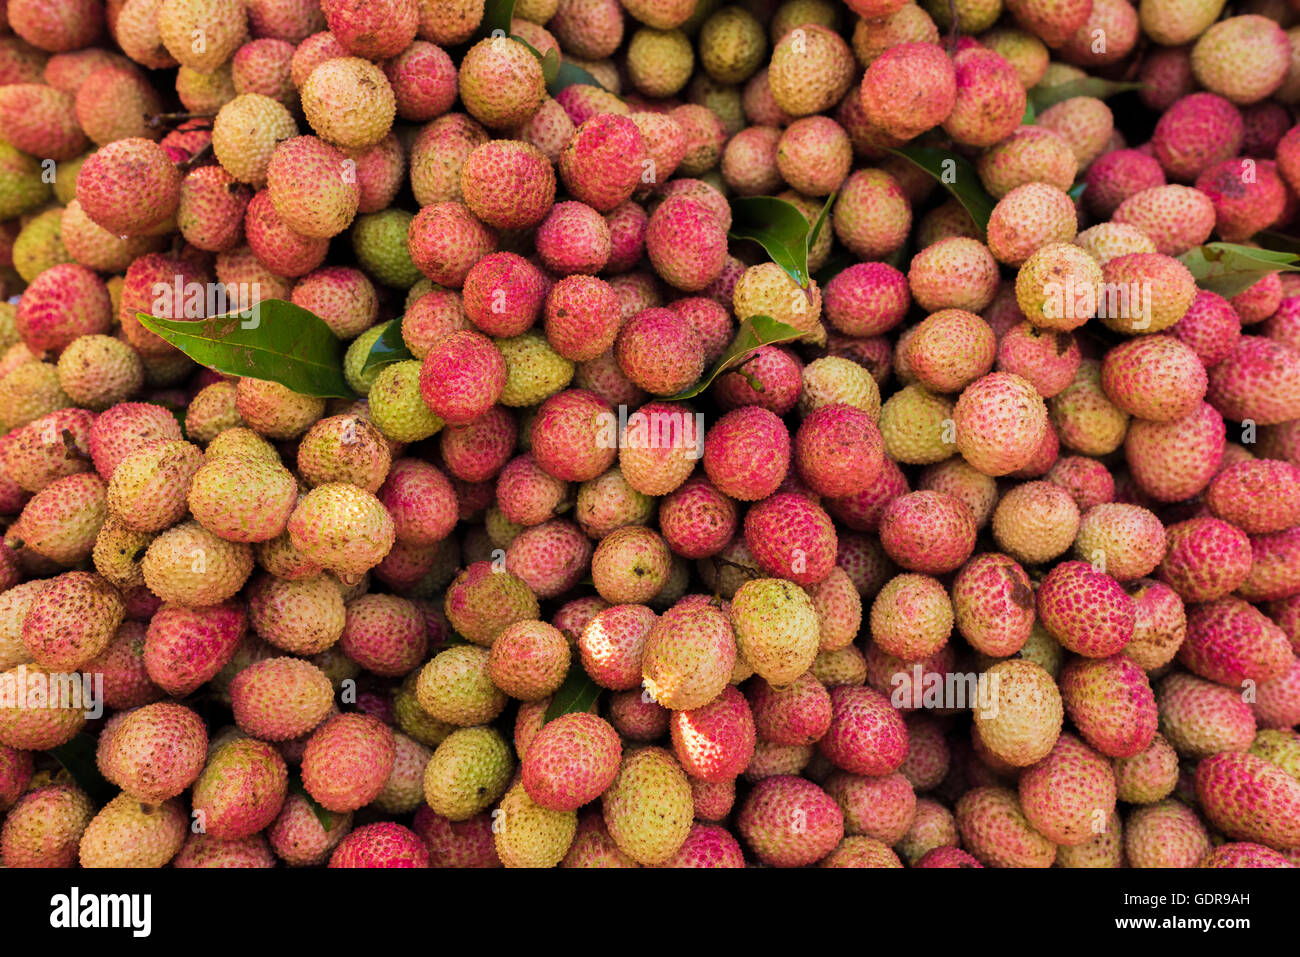 Bunch of lichee's fruit in India Stock Photo